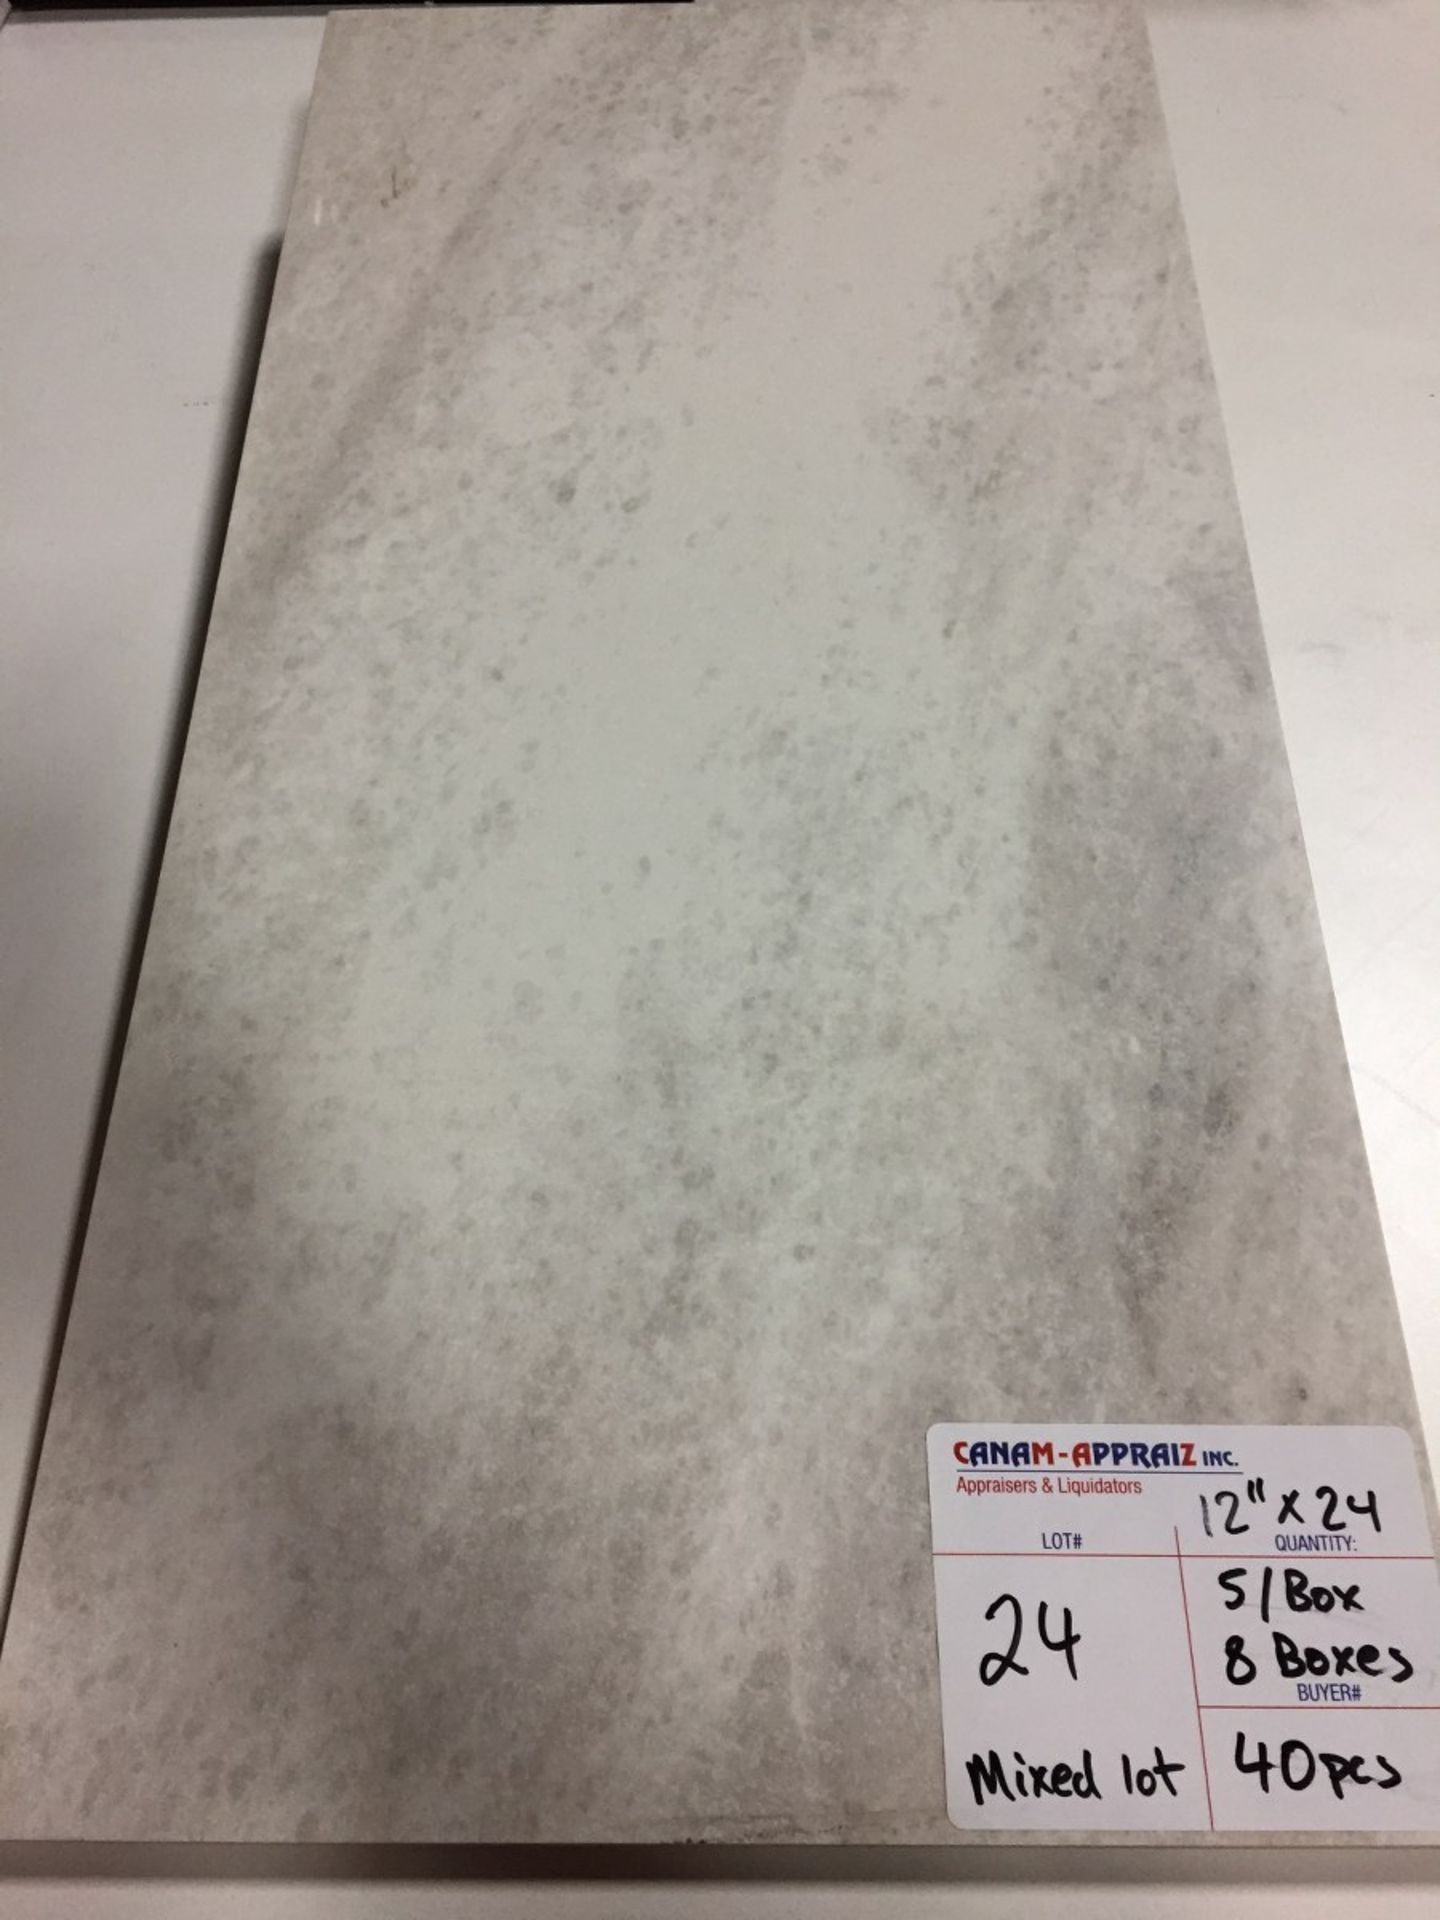 MIXED LOT - 2 ITEMS - ITEM #1. 24"X24" MARMOKER CANOVA COLOUR BODY PORCELAIN MATTE TILE MADE IN - Image 3 of 7